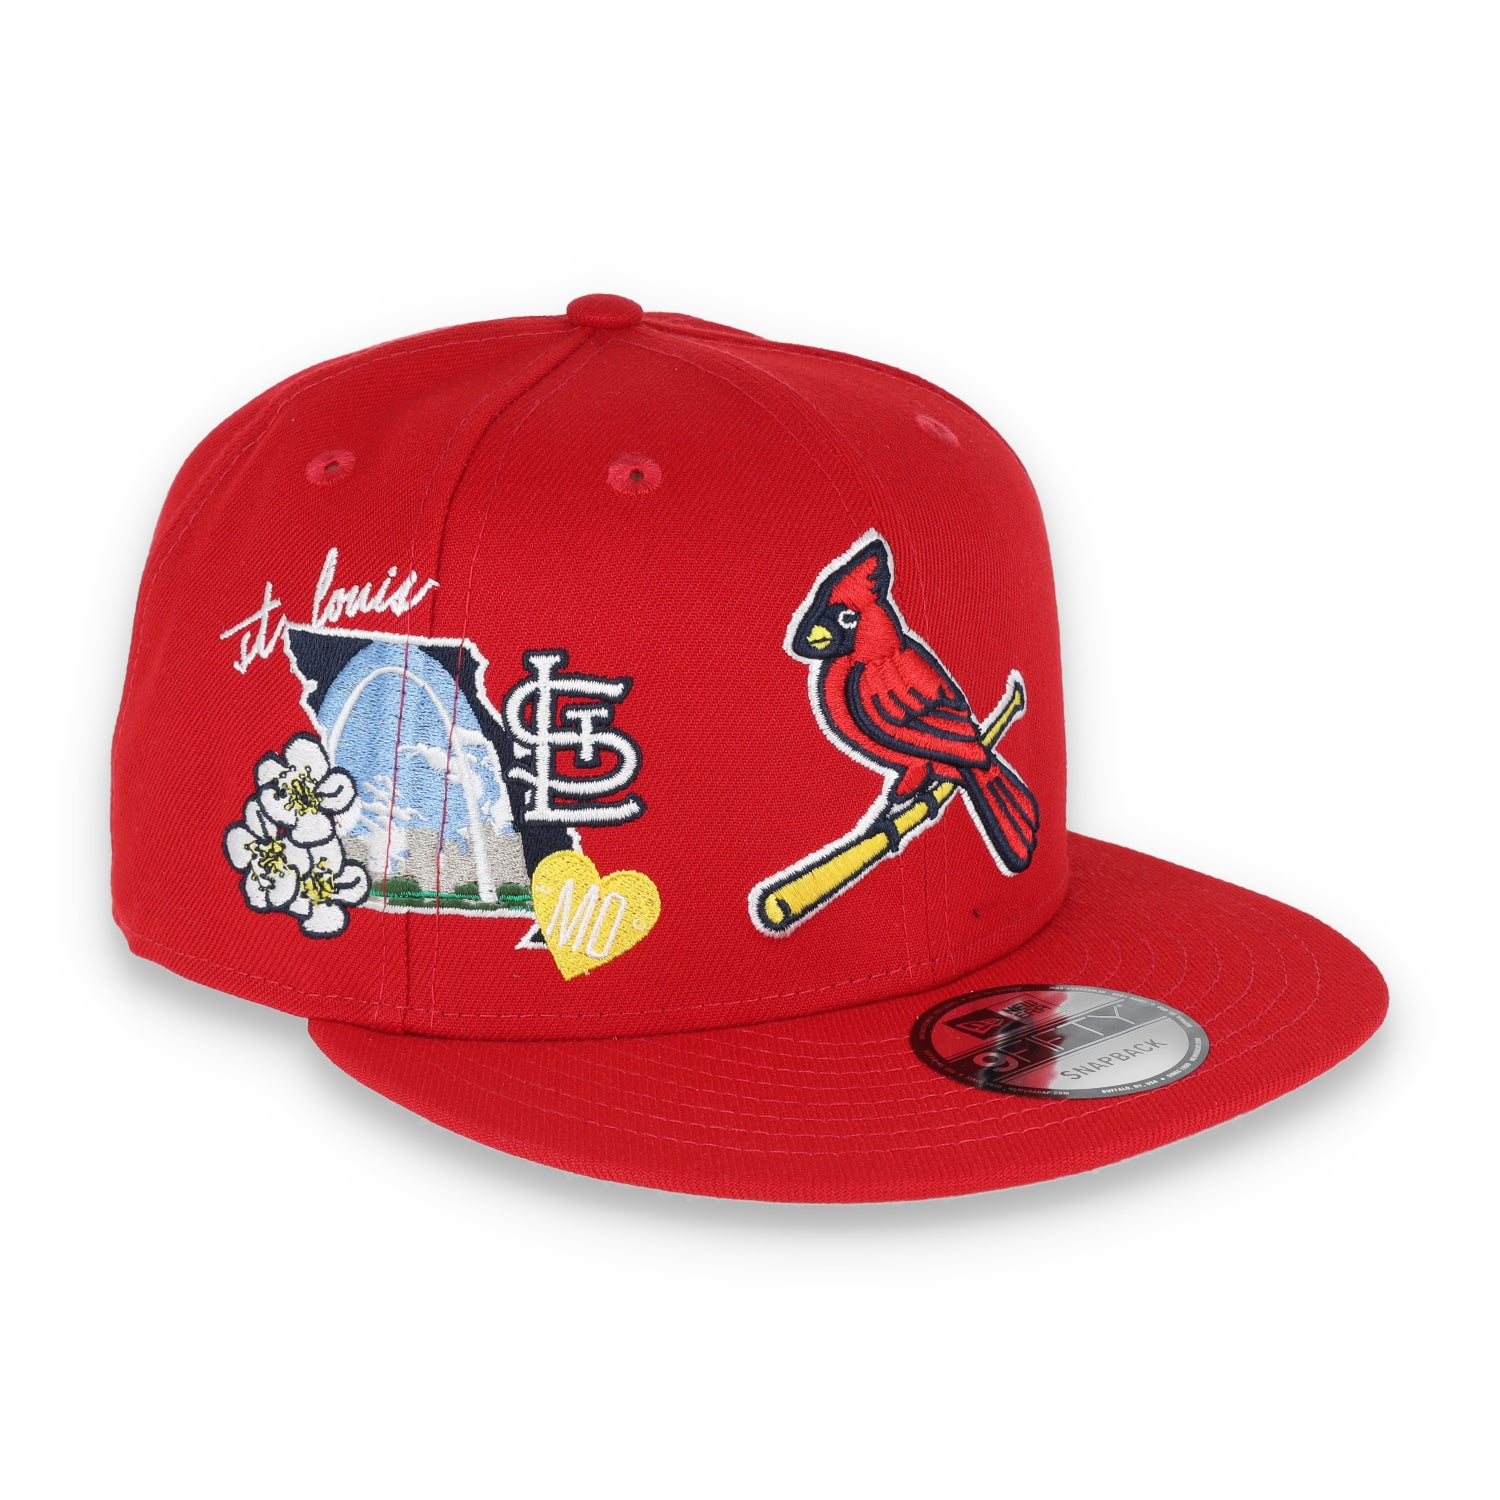 New Era St Louis Cardinals Icon E1 9Fifty Snapback Hat-Red